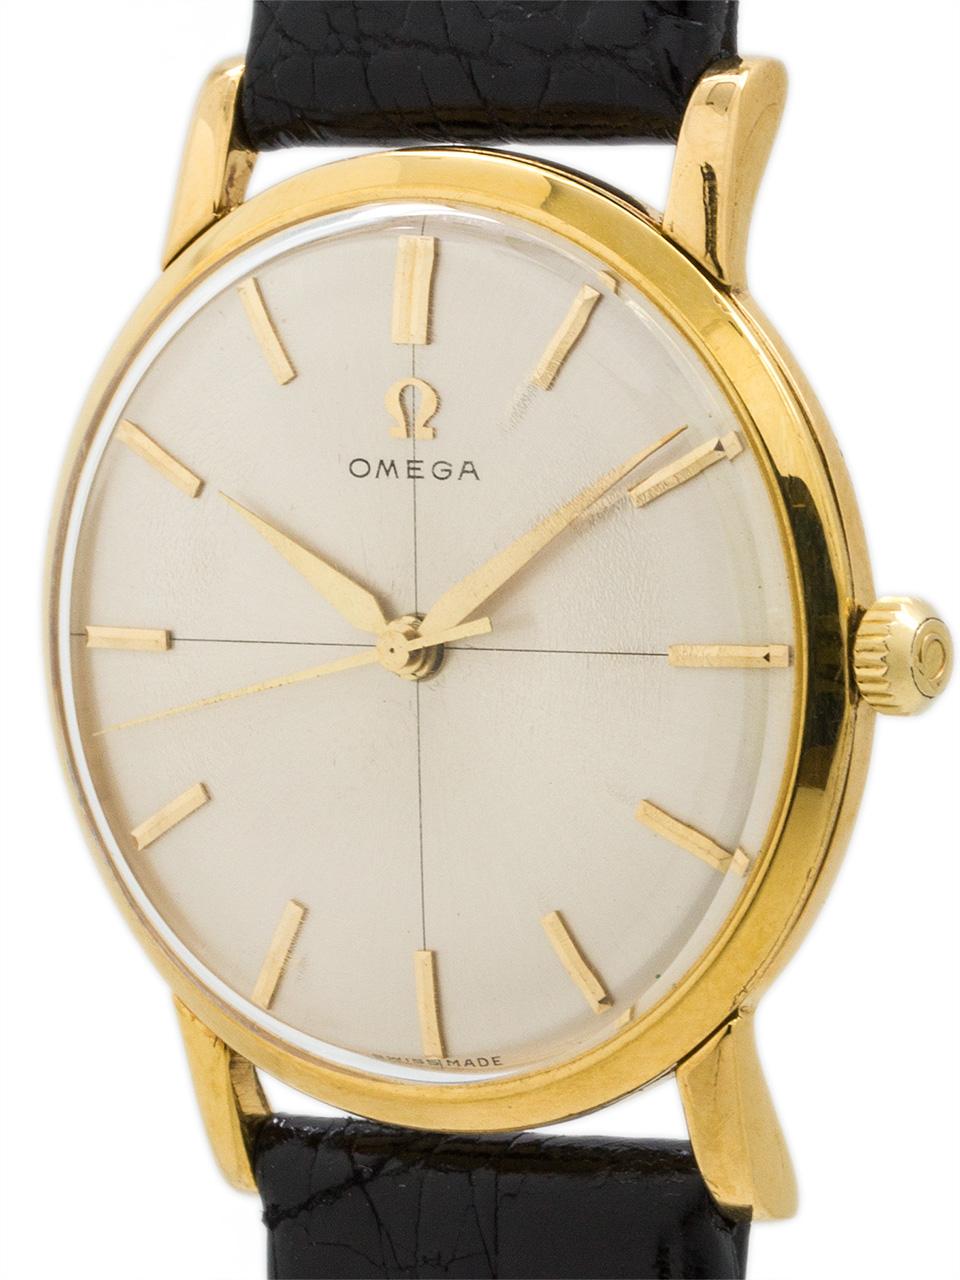 Omega Gold-Plated Manual Wind Dress Model, circa 1961 In Excellent Condition For Sale In West Hollywood, CA